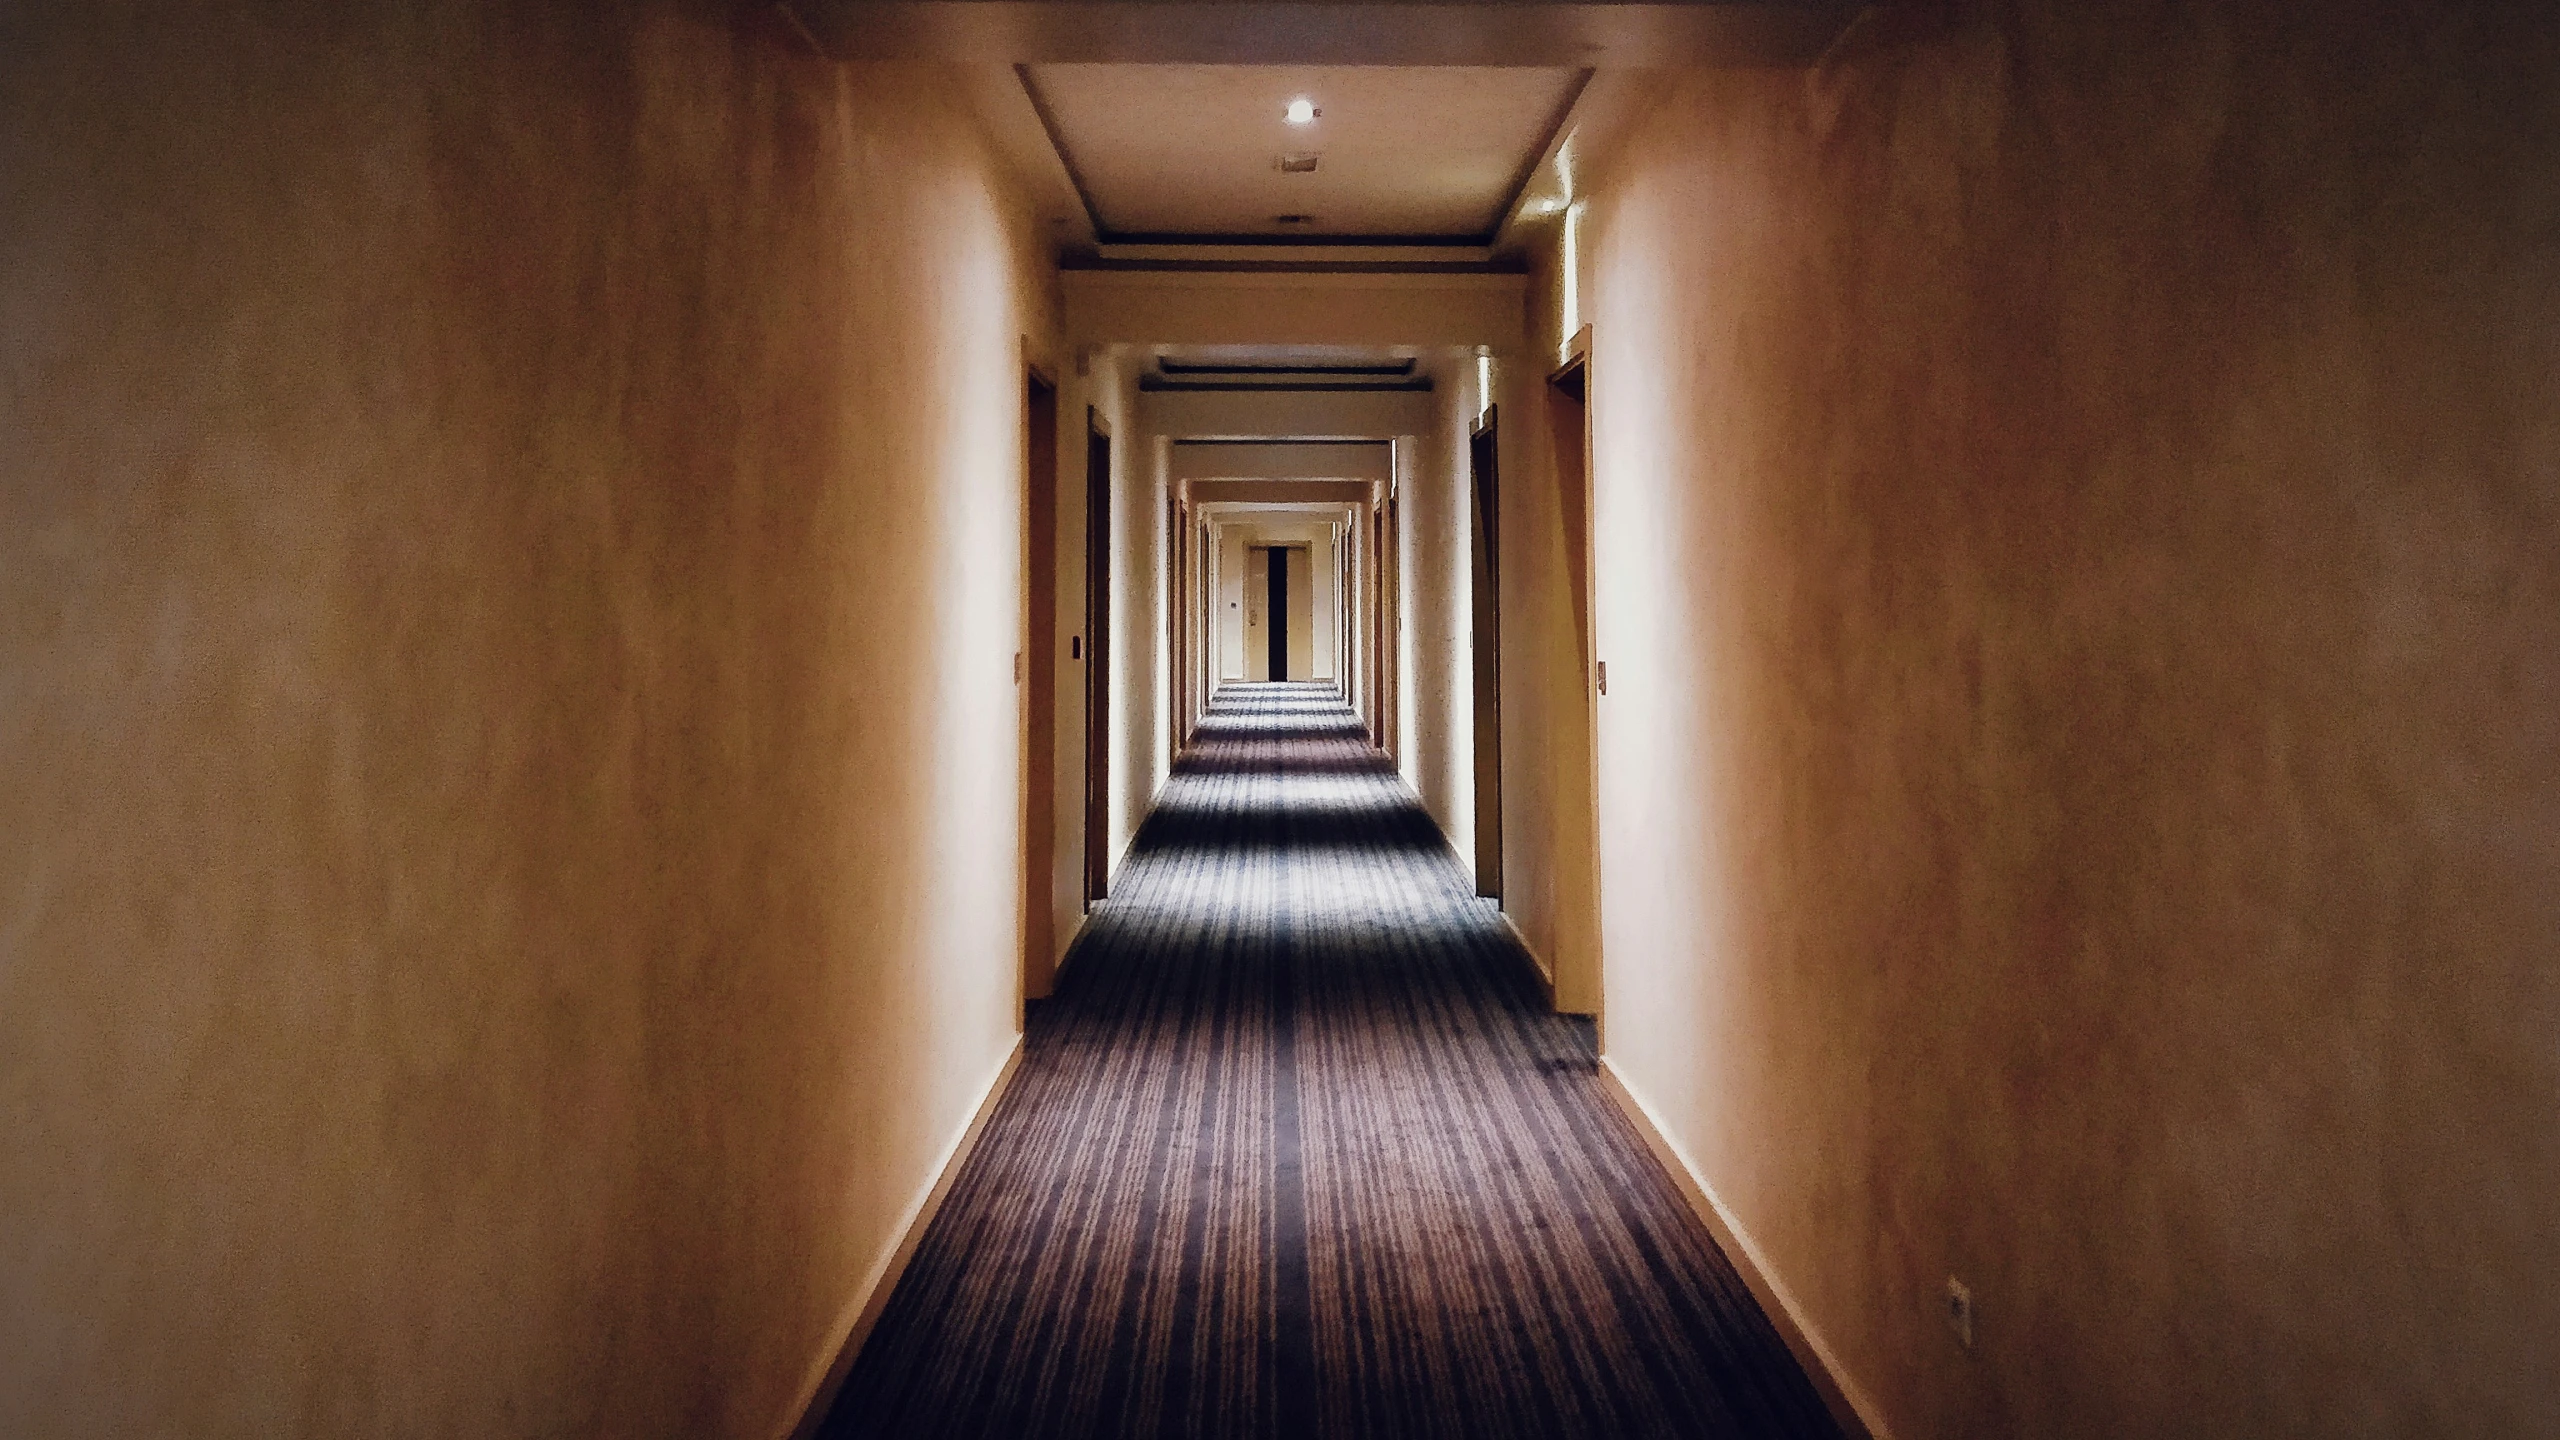 a long empty hallway lined with light on the ceiling